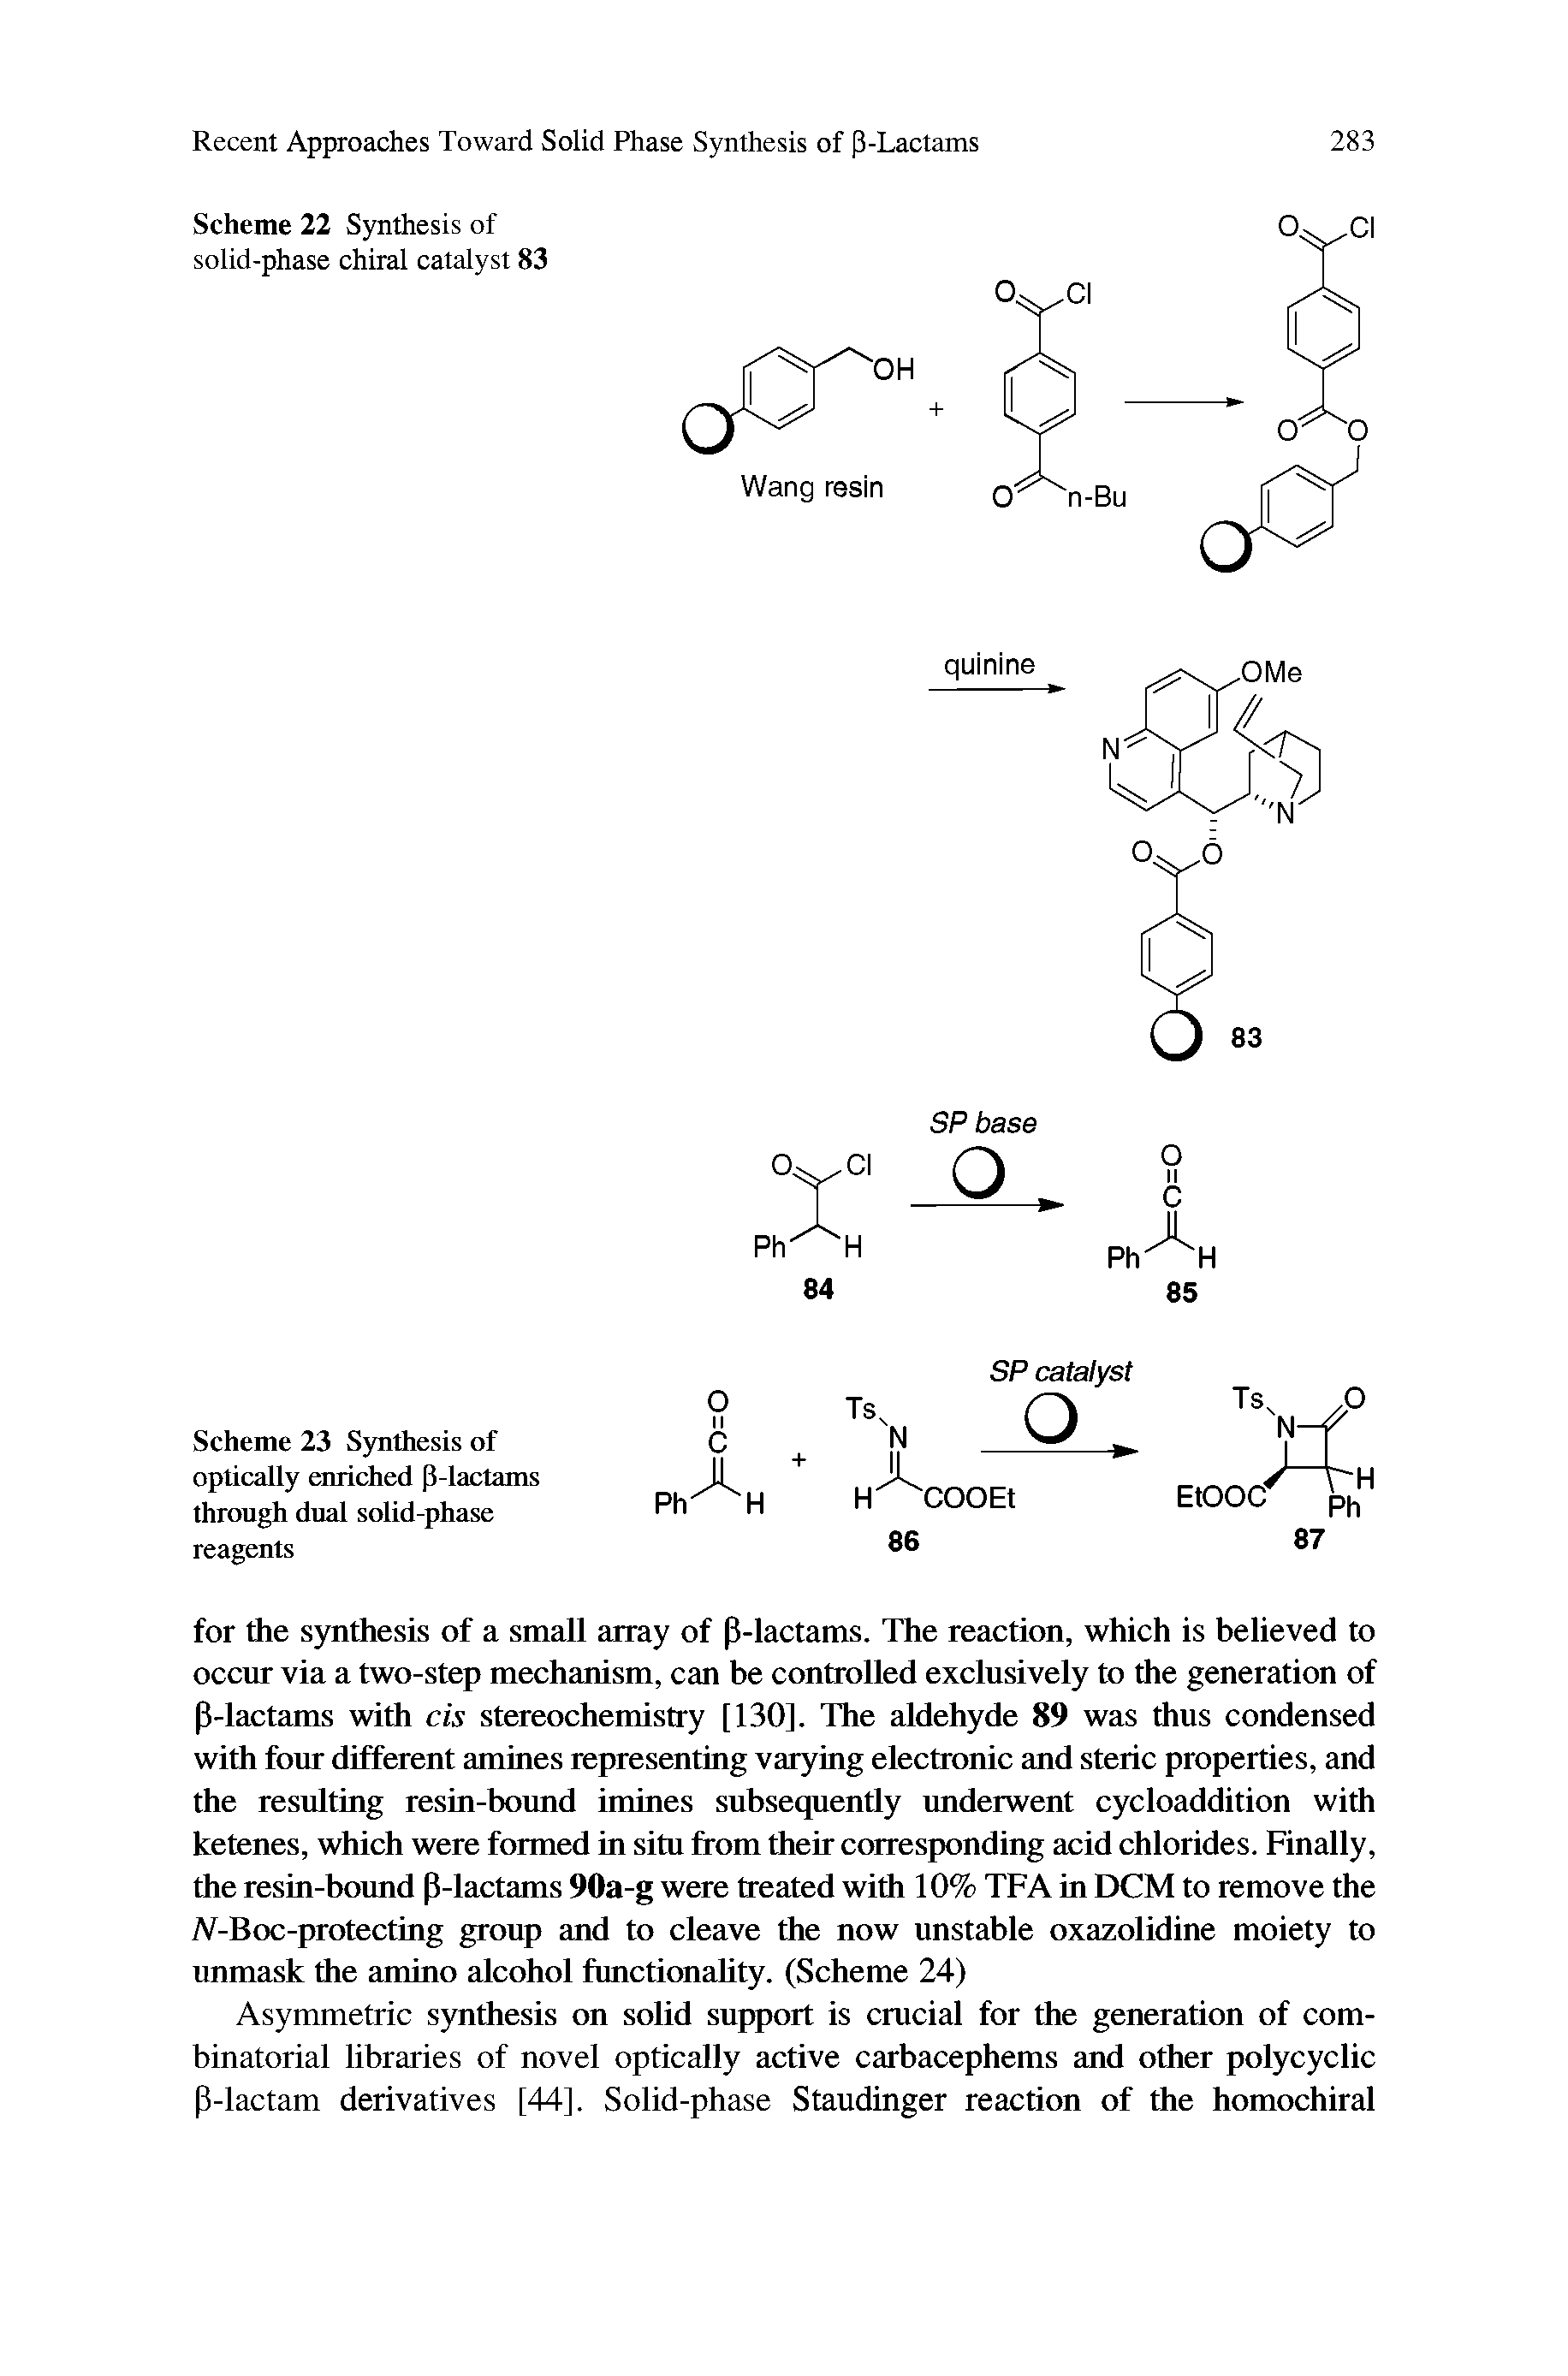 Scheme 22 Synthesis of solid-phase chiral catalyst 83...